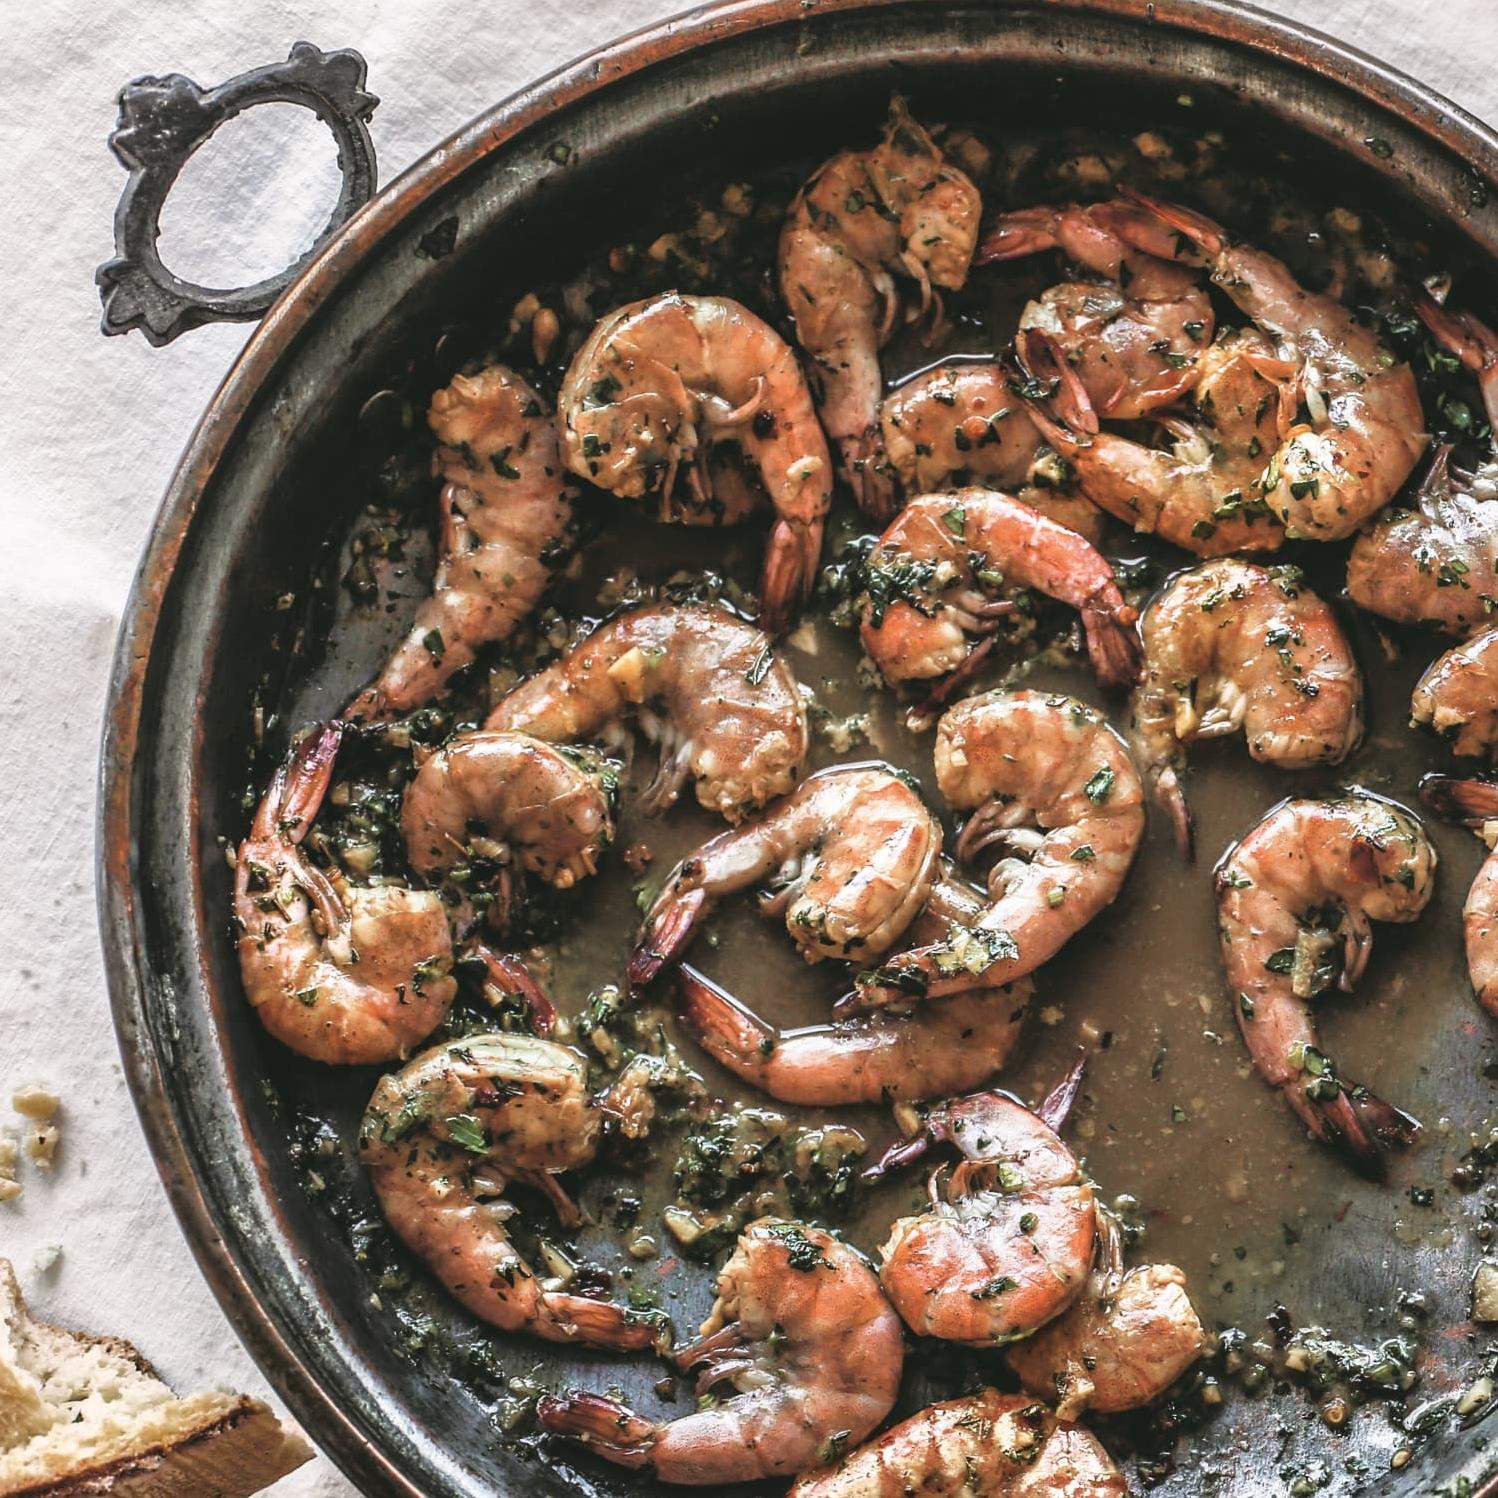  There's nothing quite like the aroma of succulent Barbecued Shrimp wafting through your backyard.